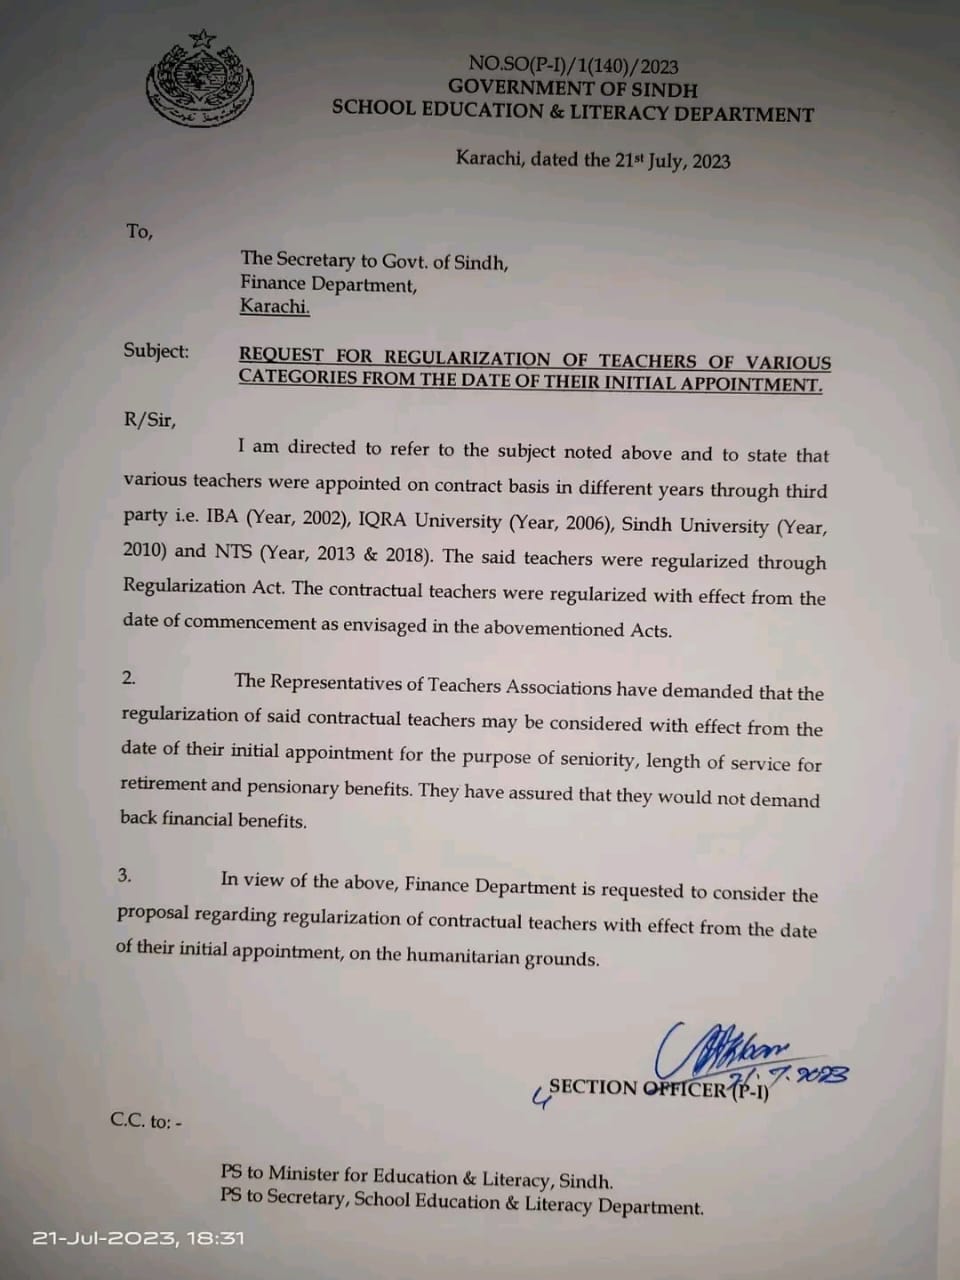 Updates of Regularization of Teachers wef Date of Initial Appointment in Sindh